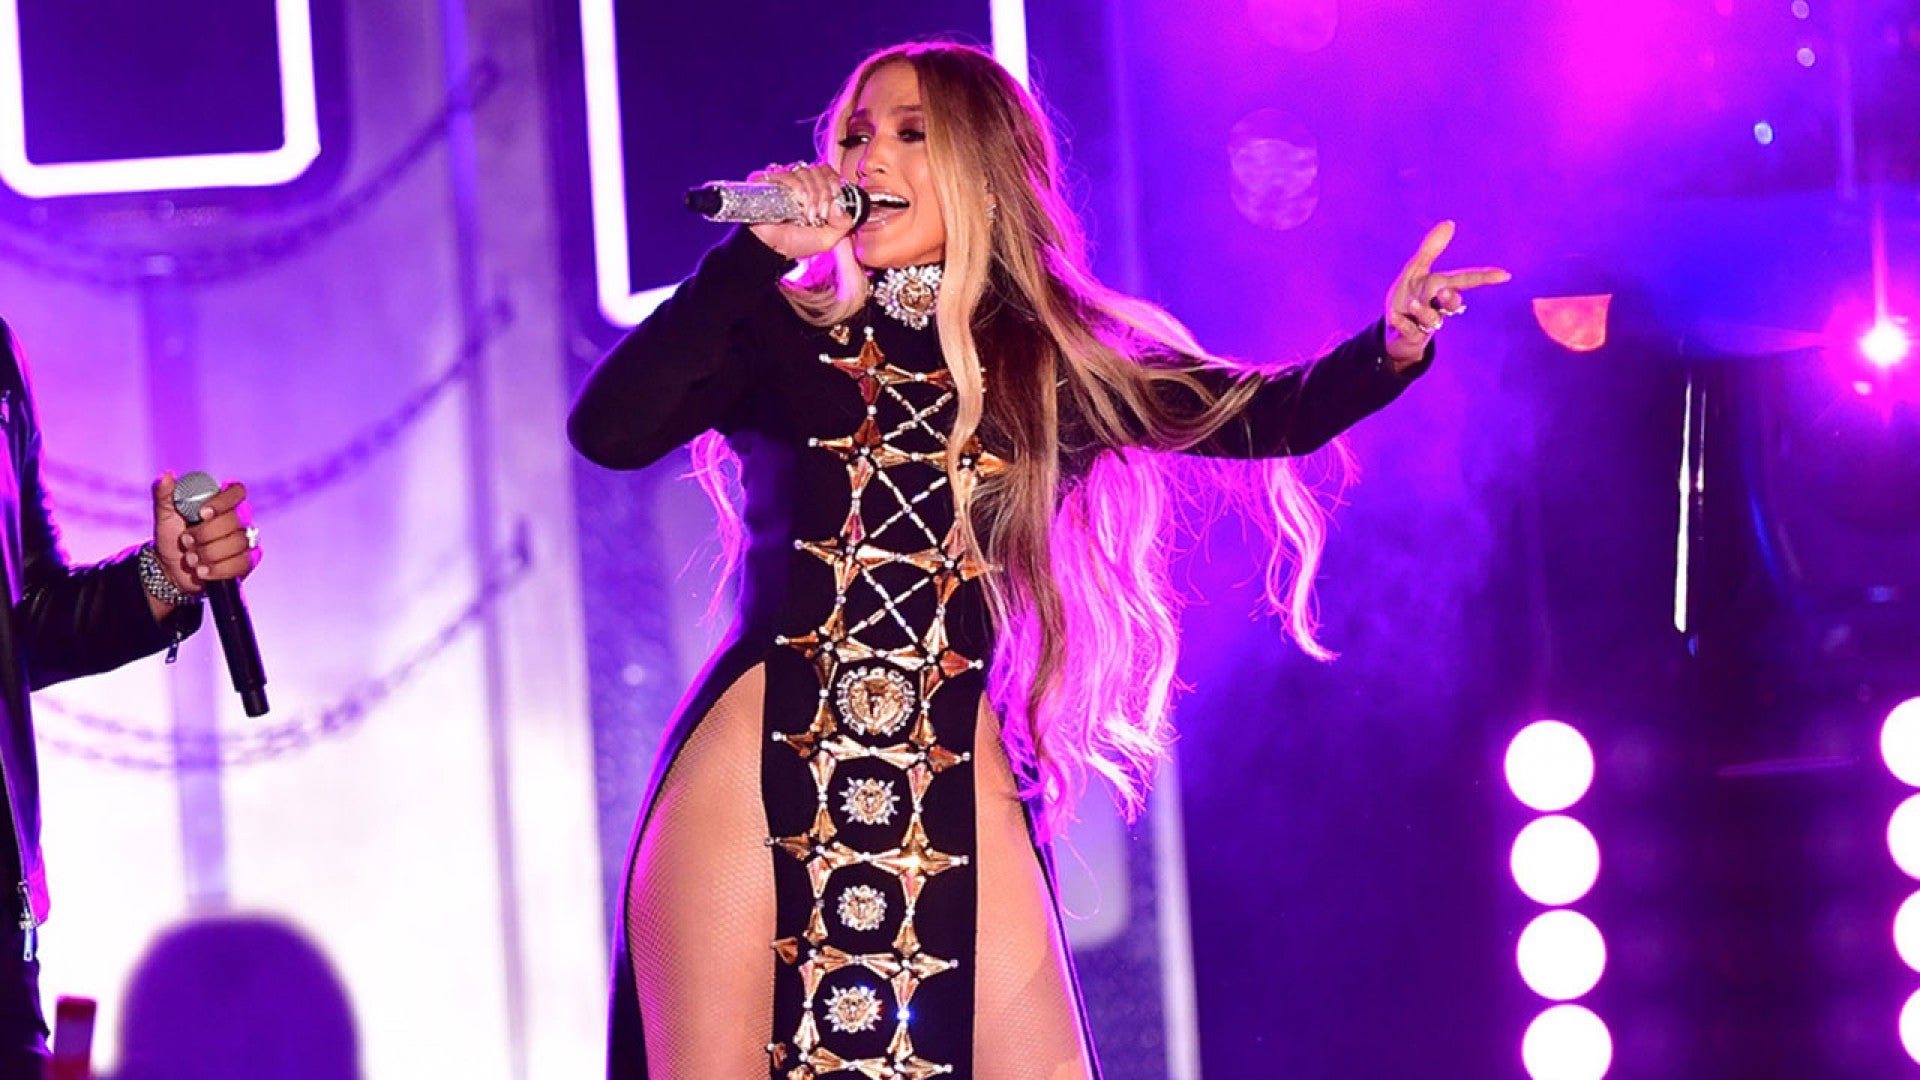 Jennifer Lopez Stuns In Double Thigh High Cutout Dress To Perform New Spanish Single